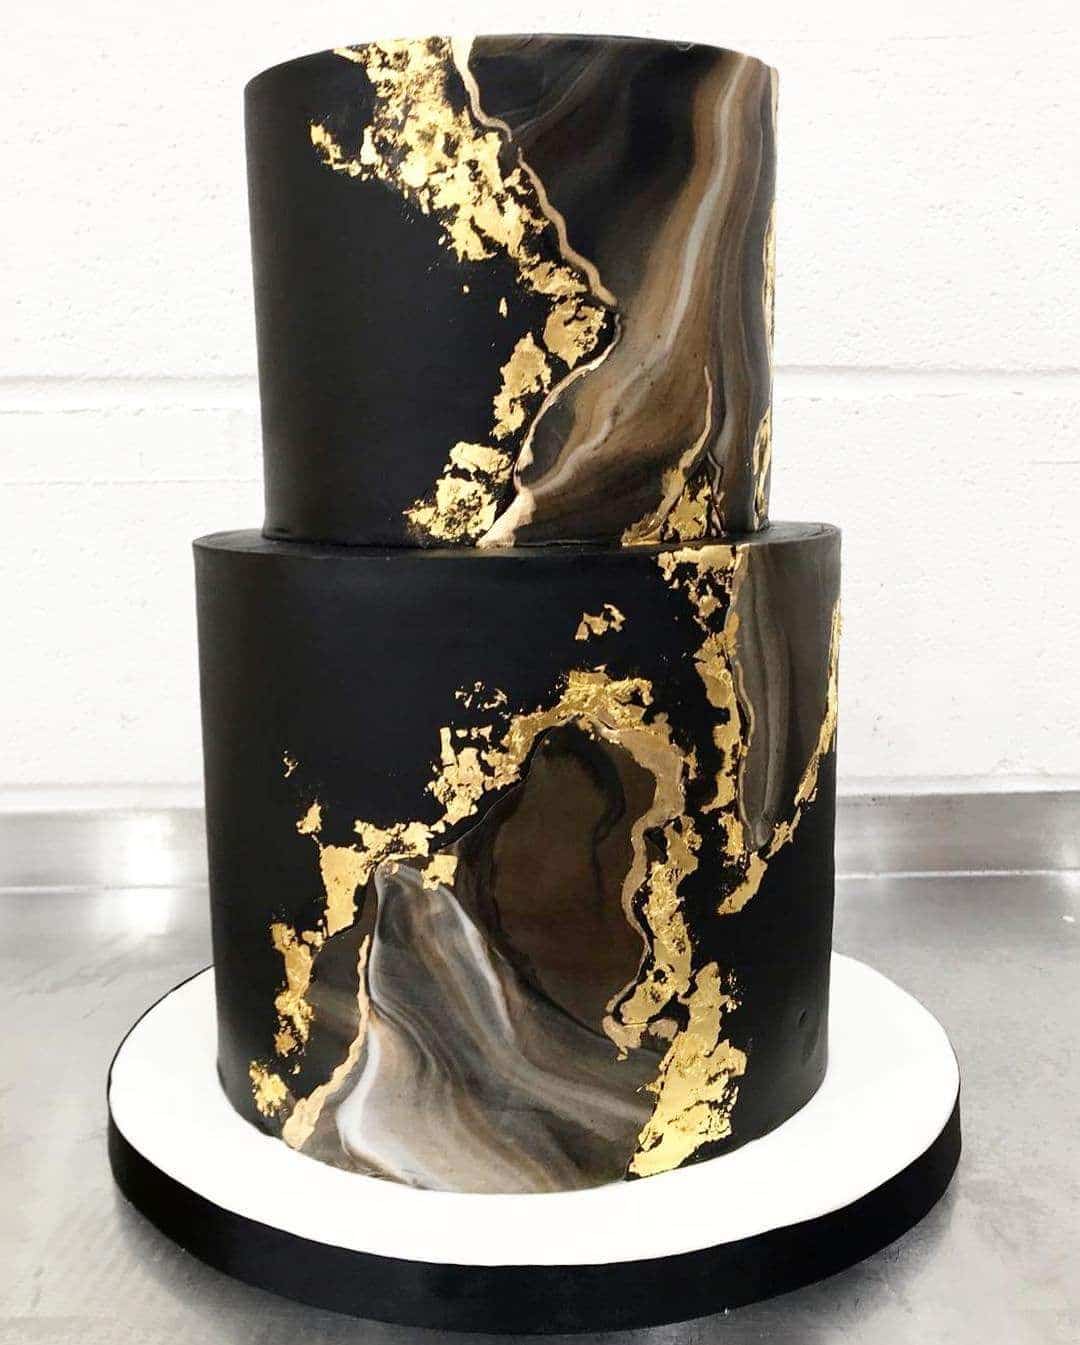 Pin by Tammy Burchfield Troxel on mens cakes